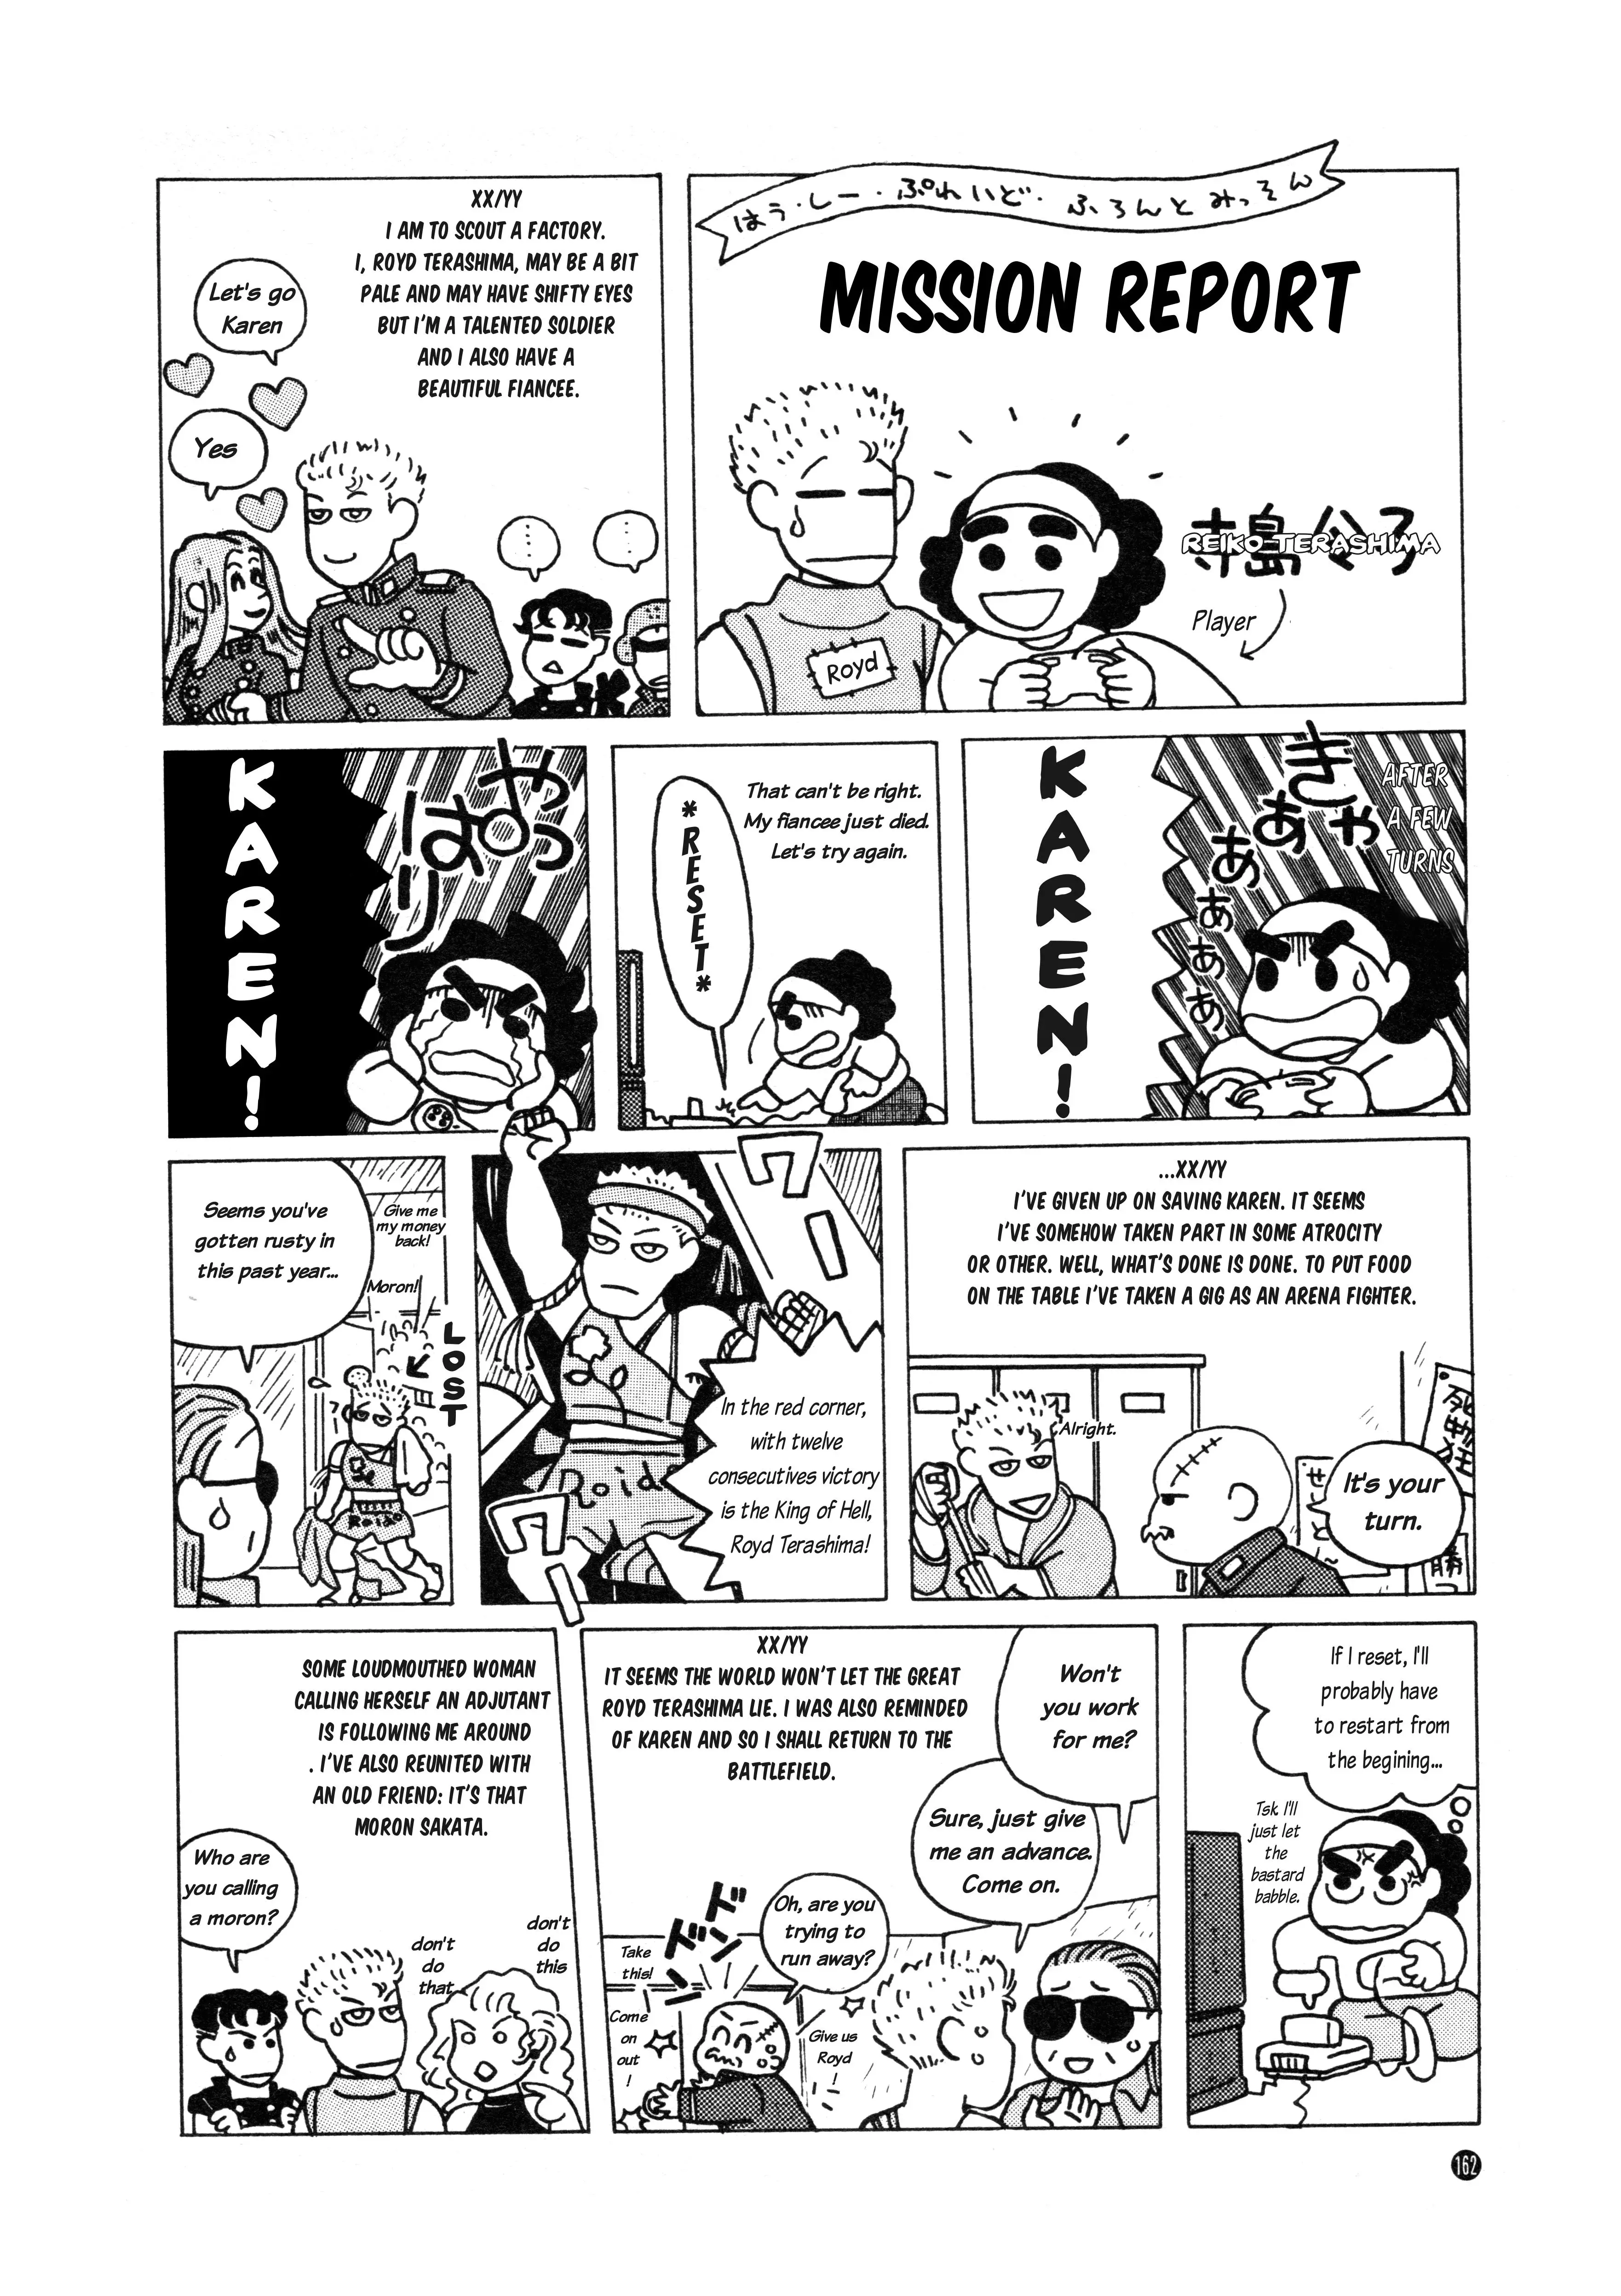 Front Mission - 9 page 1-df9453db